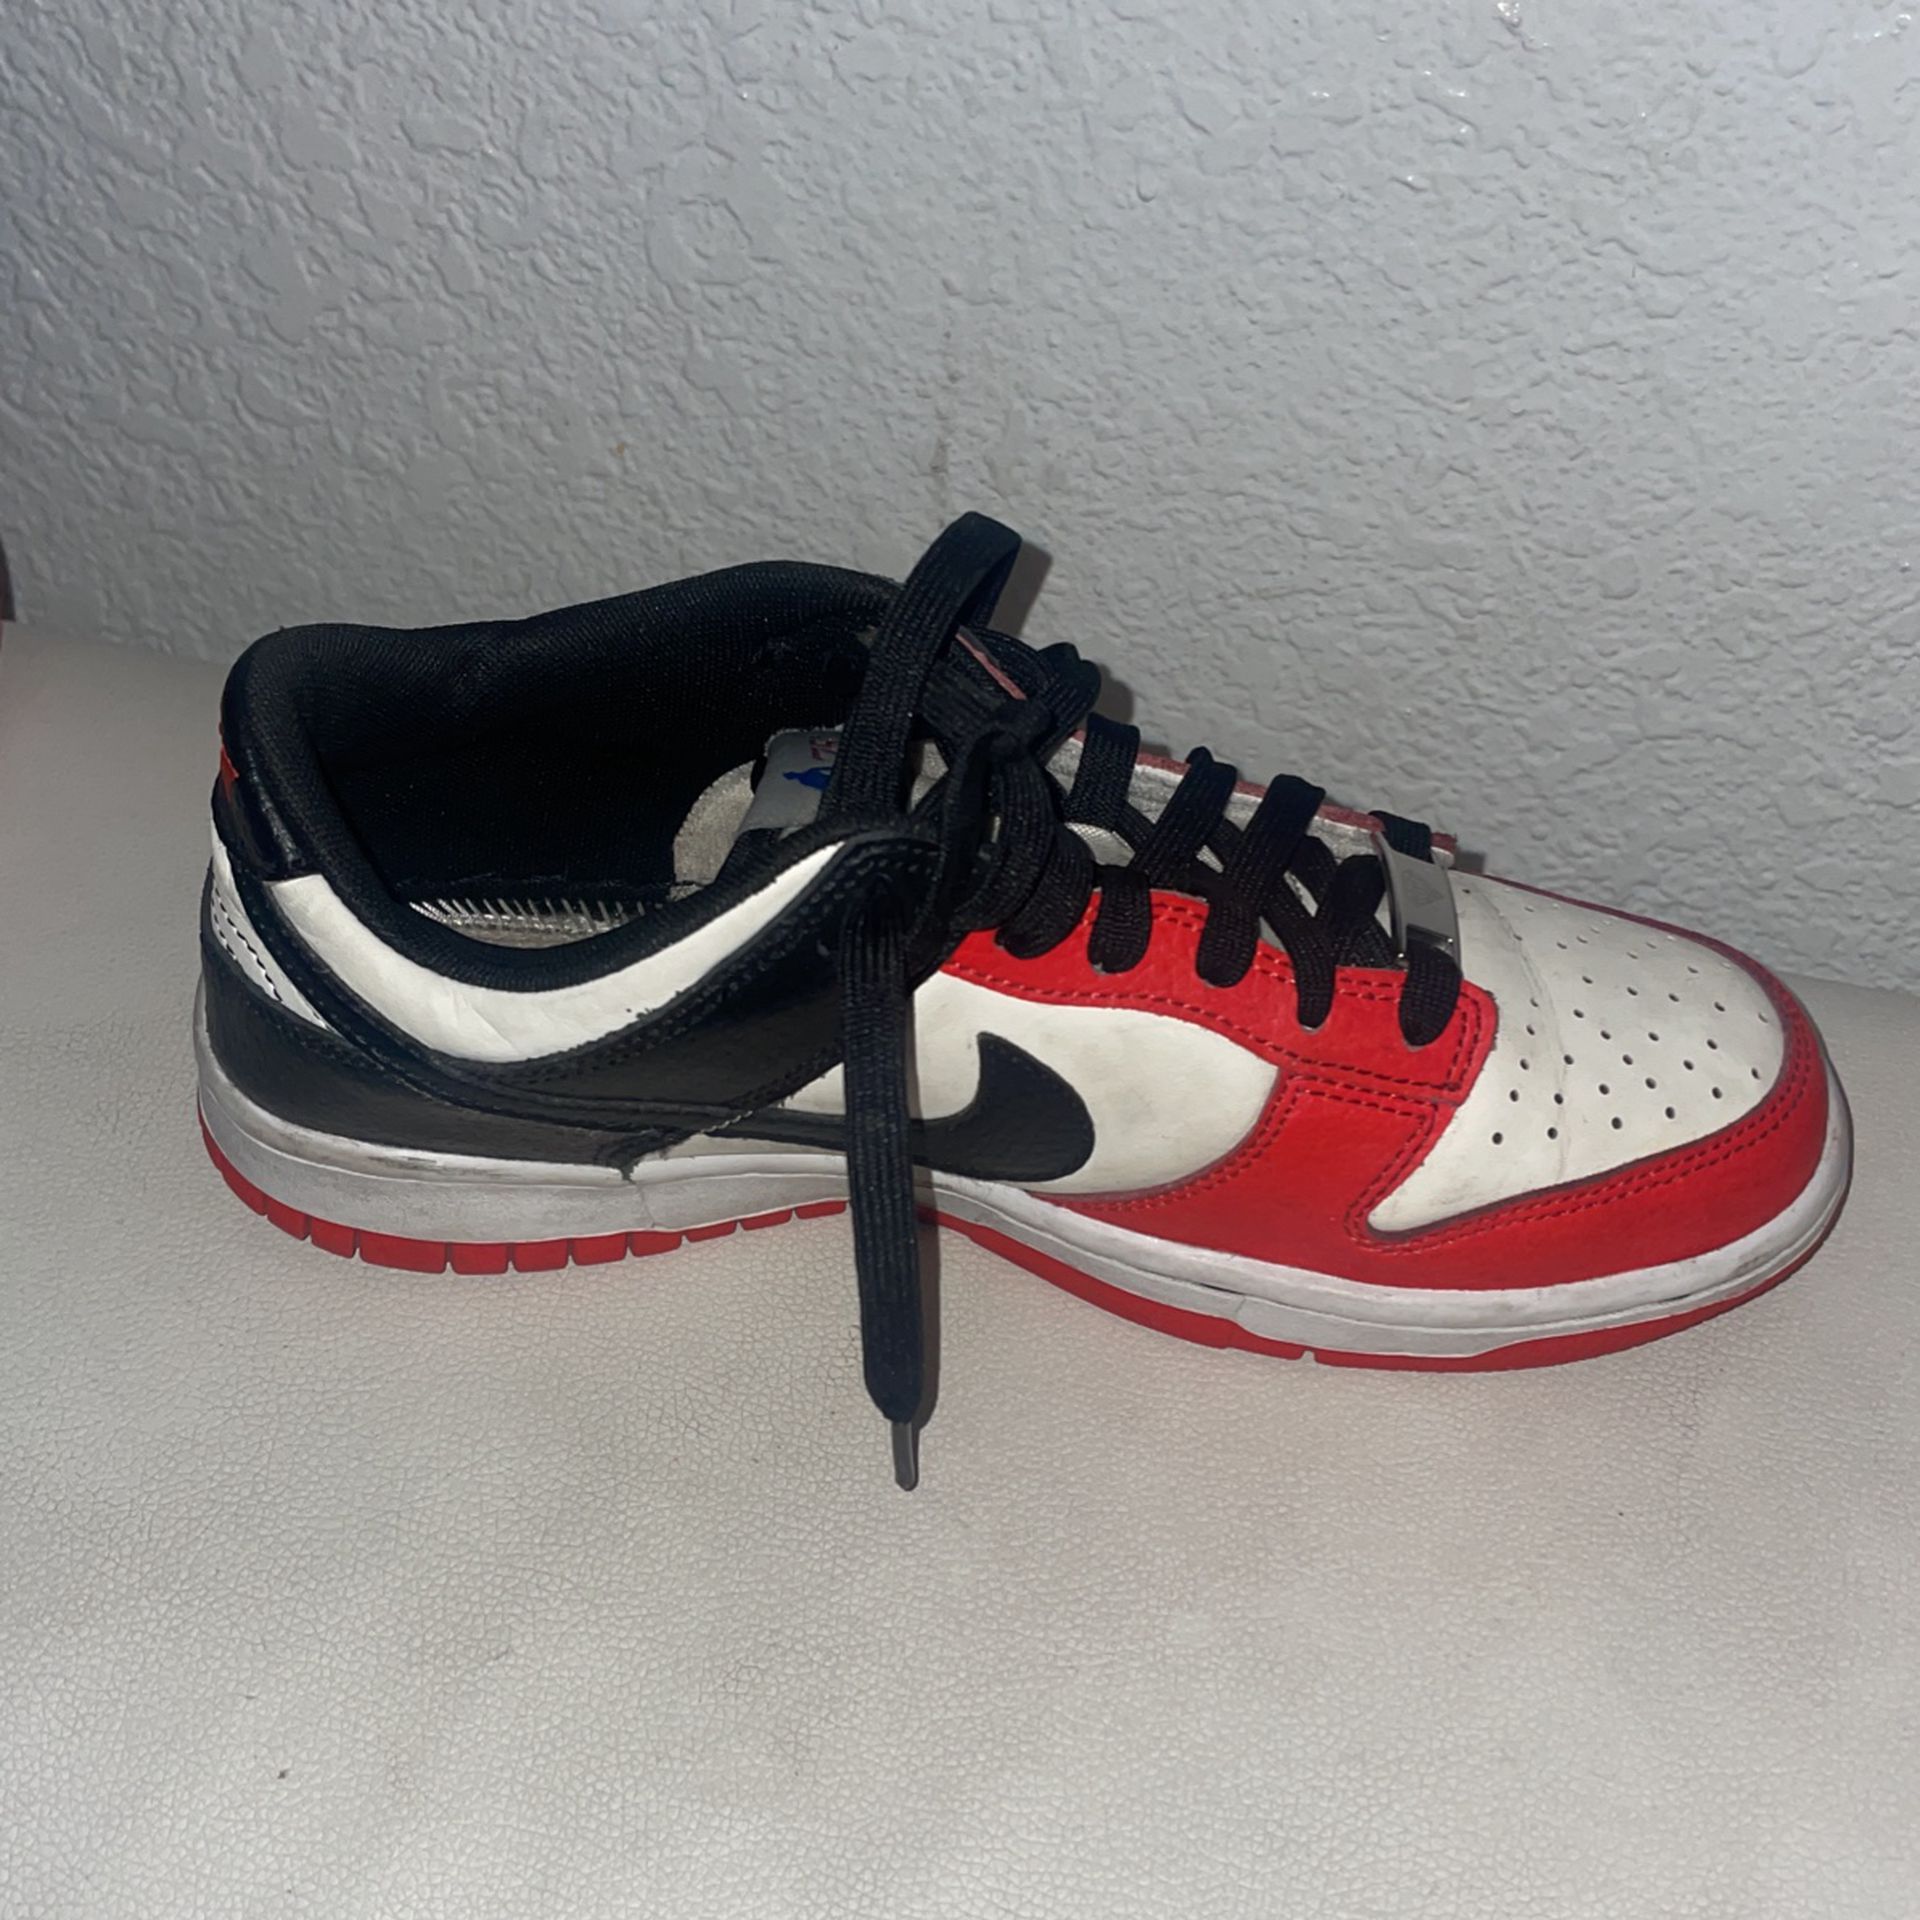 Dunks Size 6.5 Red And Black 